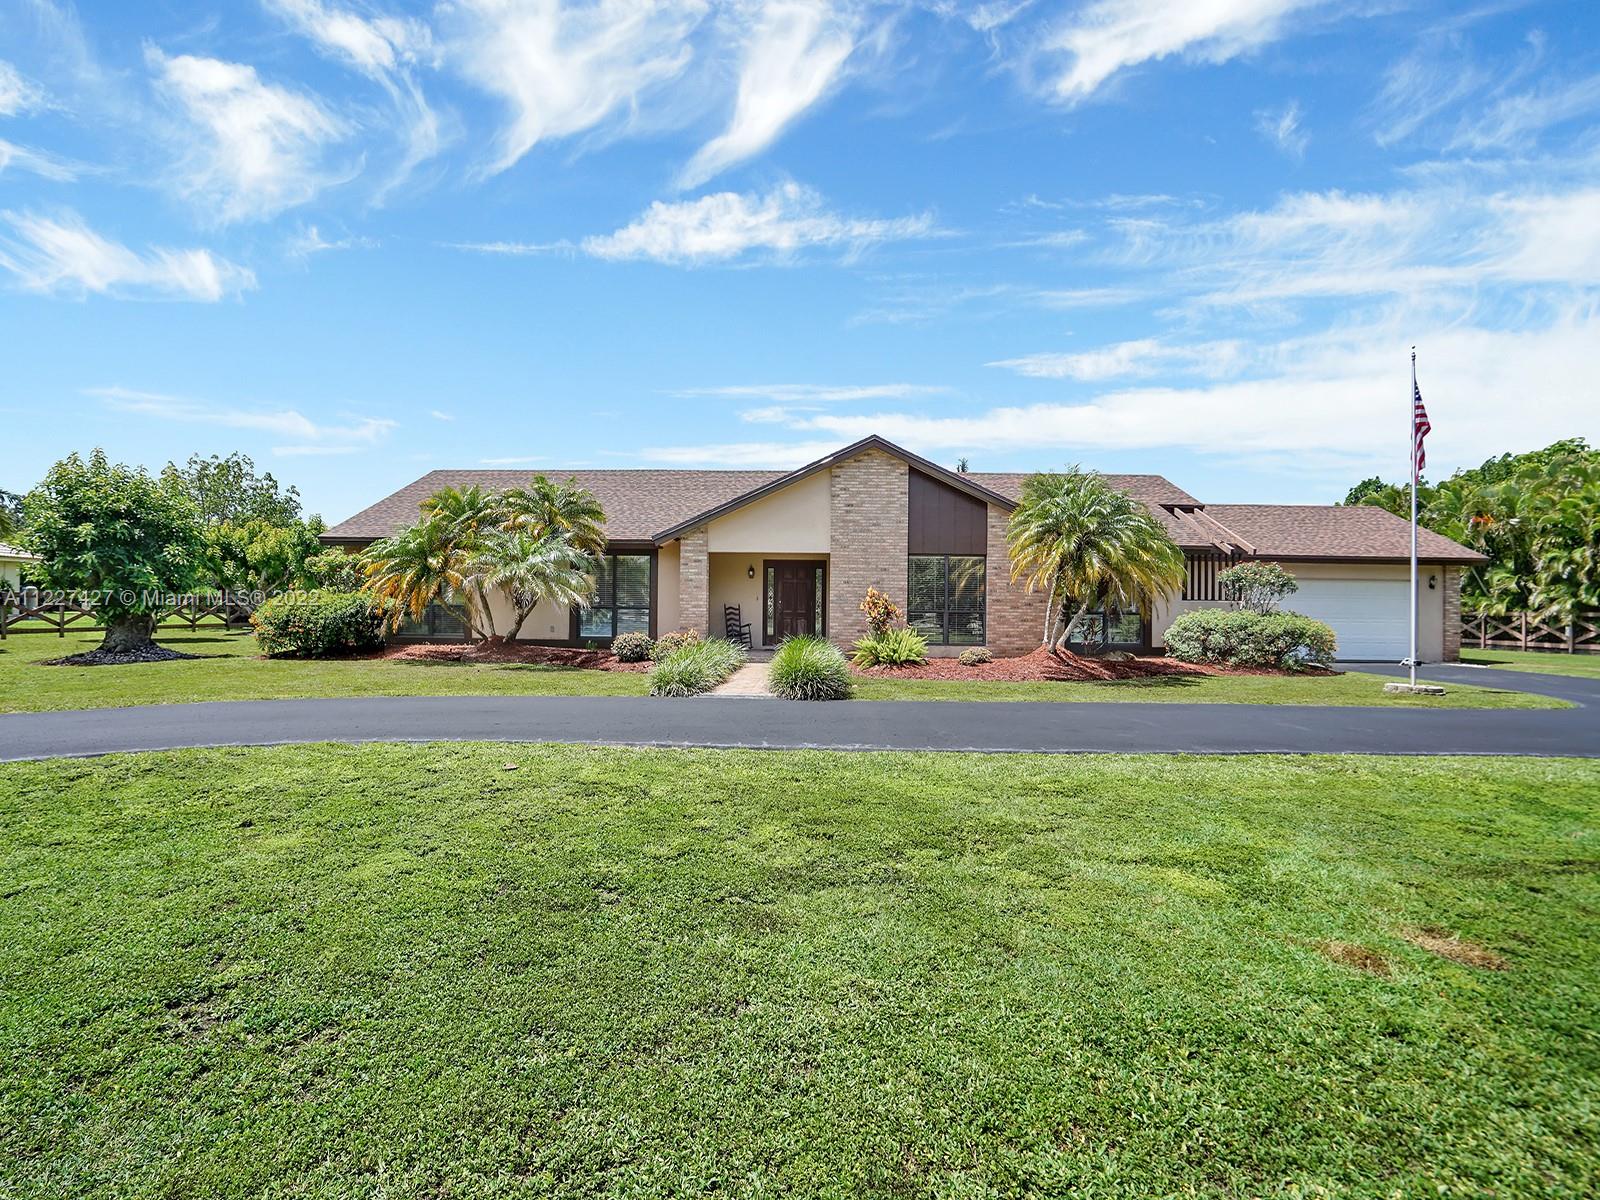 THIS IS A ONE OF A KIND CUSTOM BUILT BY OWNER!  This 4 bedroom, 2.5 bathroom home sits on 1.26 acres fully fenced and with fruit trees (mango and avocado).  Upon entering the home you have a large formal living room and dining room.  The skylights in the kitchen make it bright and airy.  There are custom cabinets and a eat in breakfast nook and a passthru window to the lanai.  Off the kitchen is a family room.  French doors from the kitchen and family room open up to a large lanai.   A new roof was completed in 2019.  This one will not last!